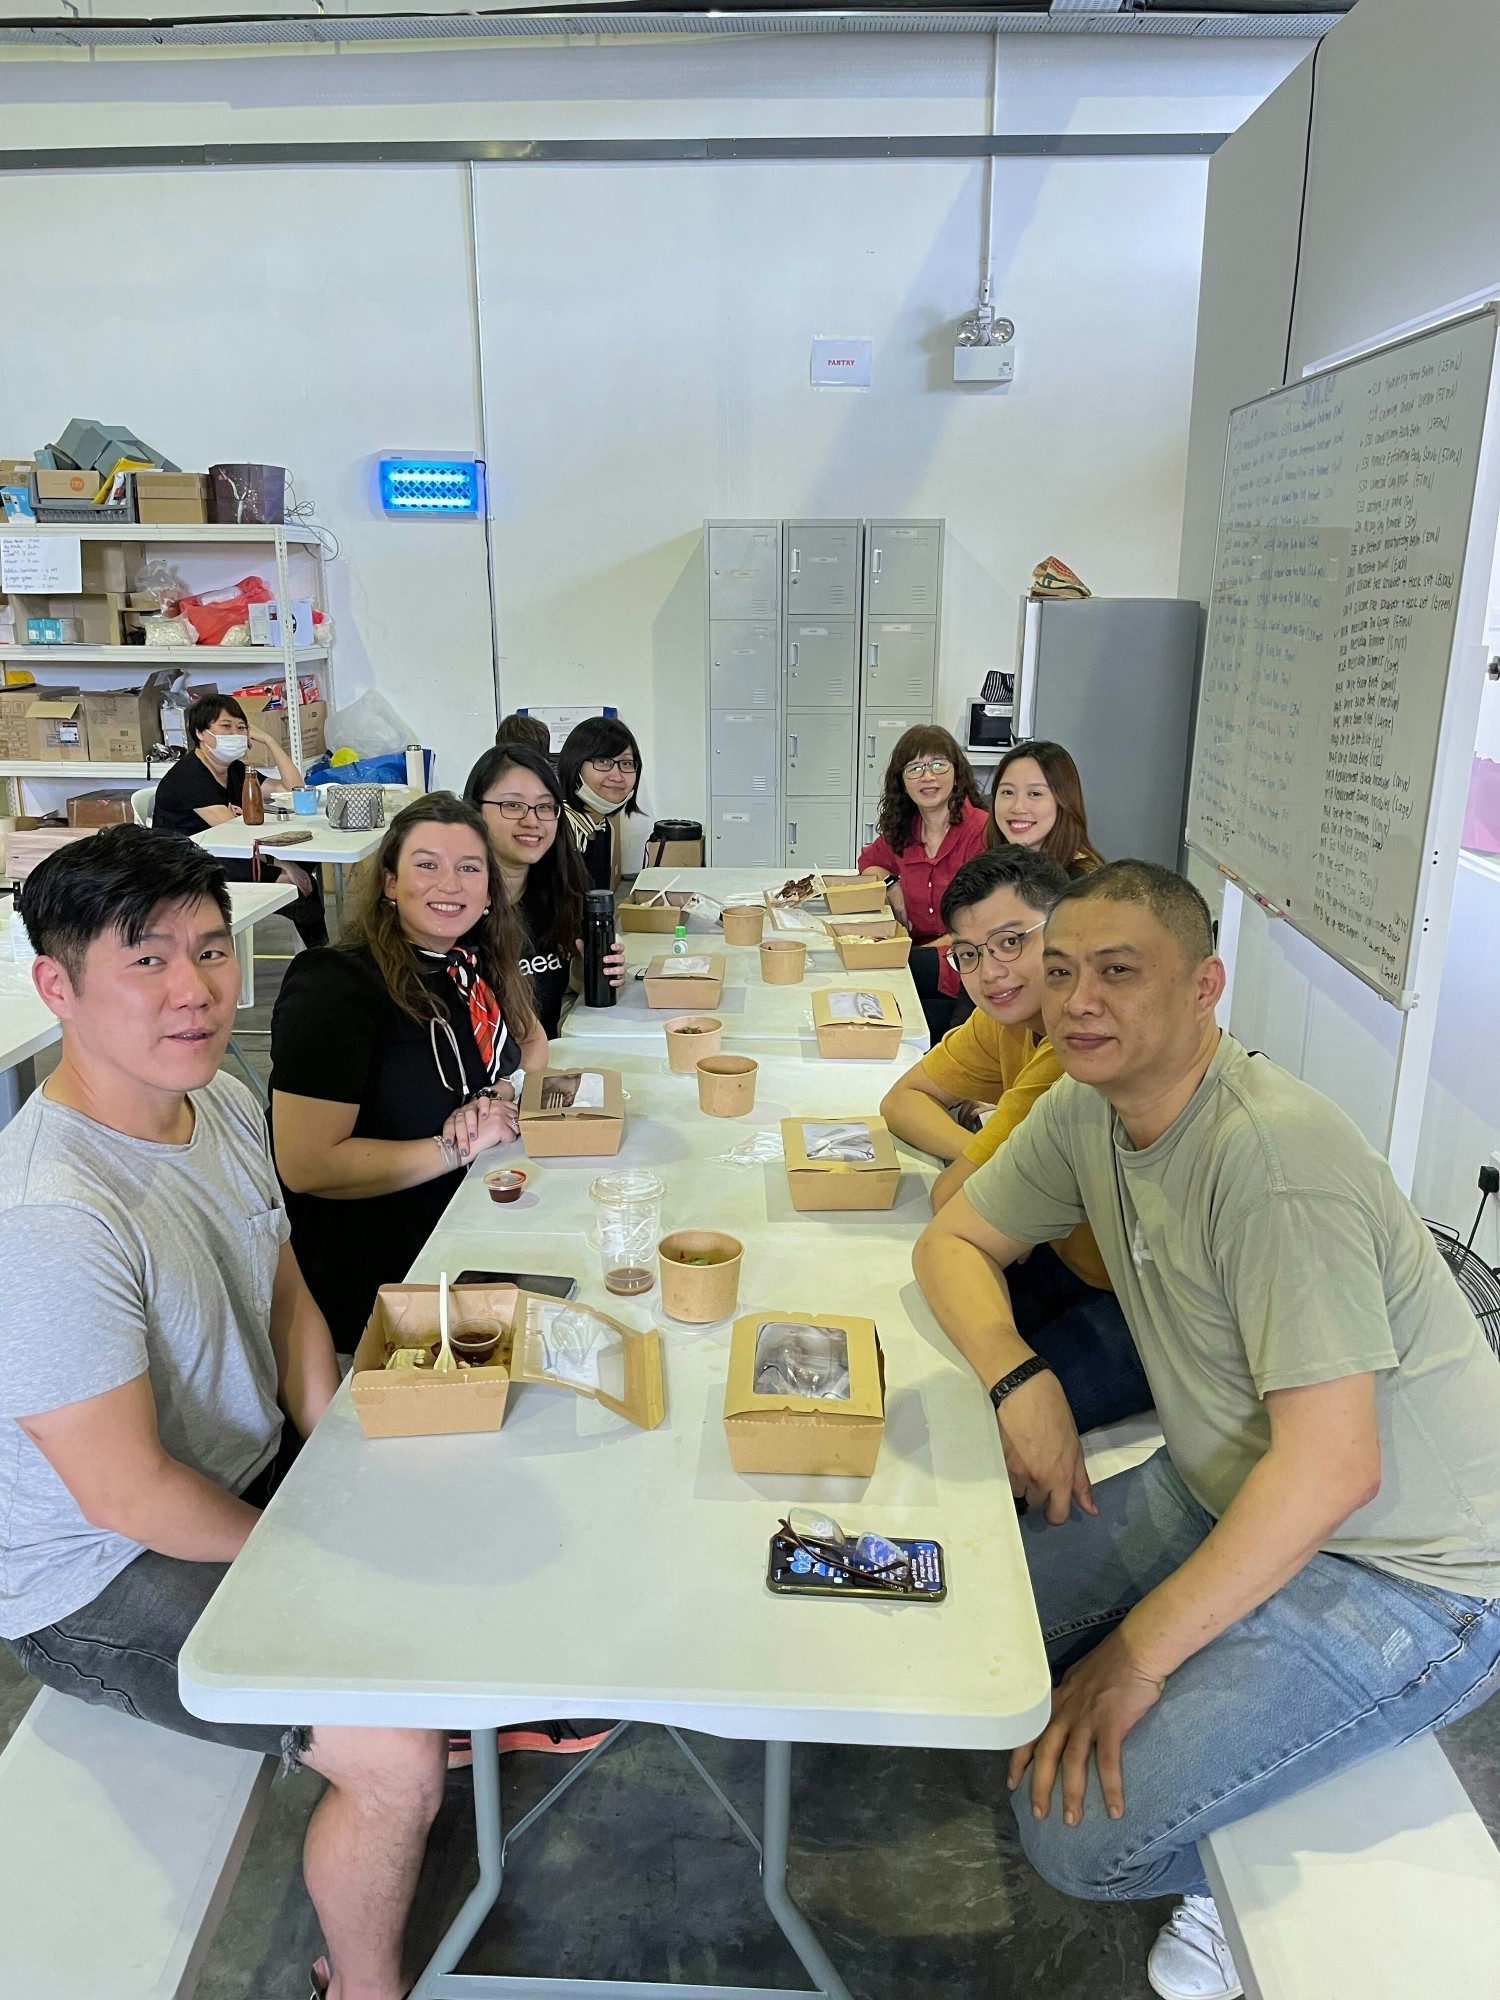 Our team in Singapore enjoying a group lunch in the warehouse.